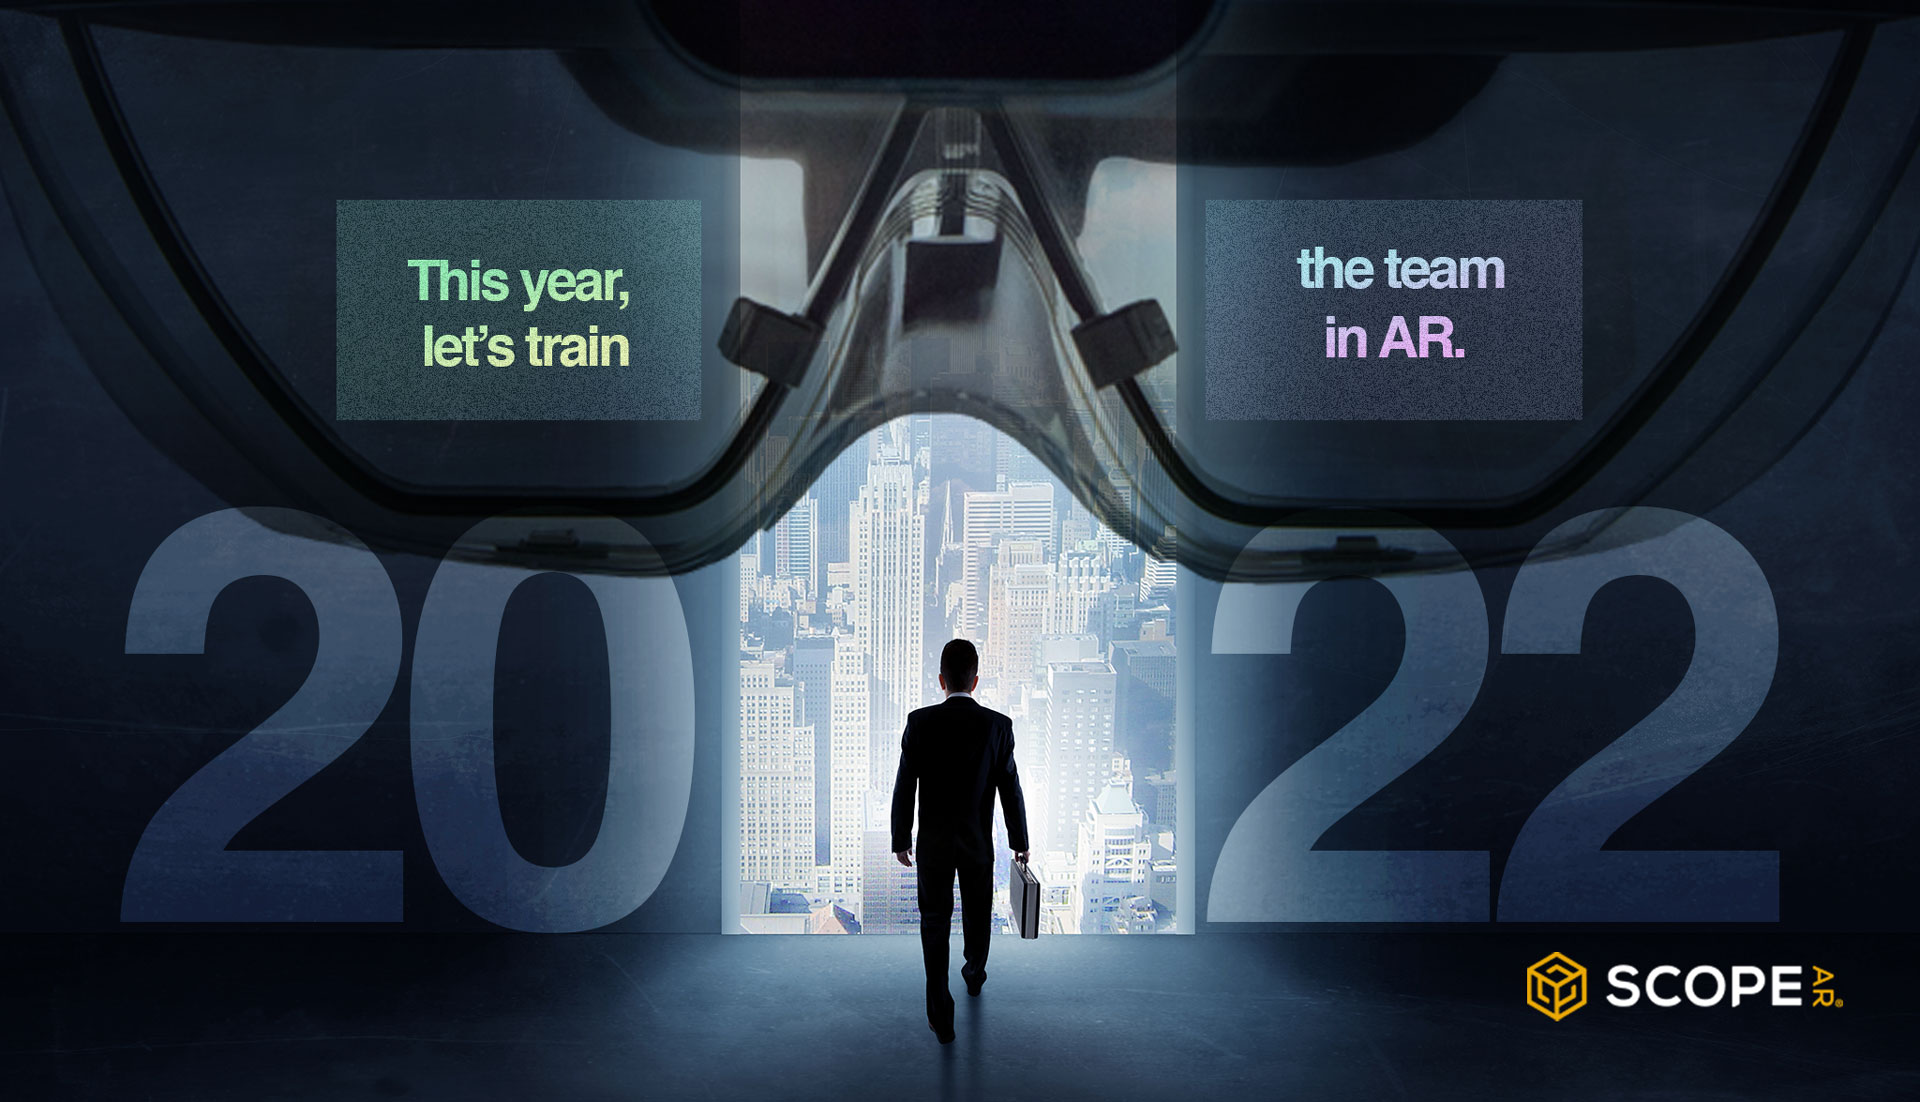 Here’s your strategy for AR training in 2022